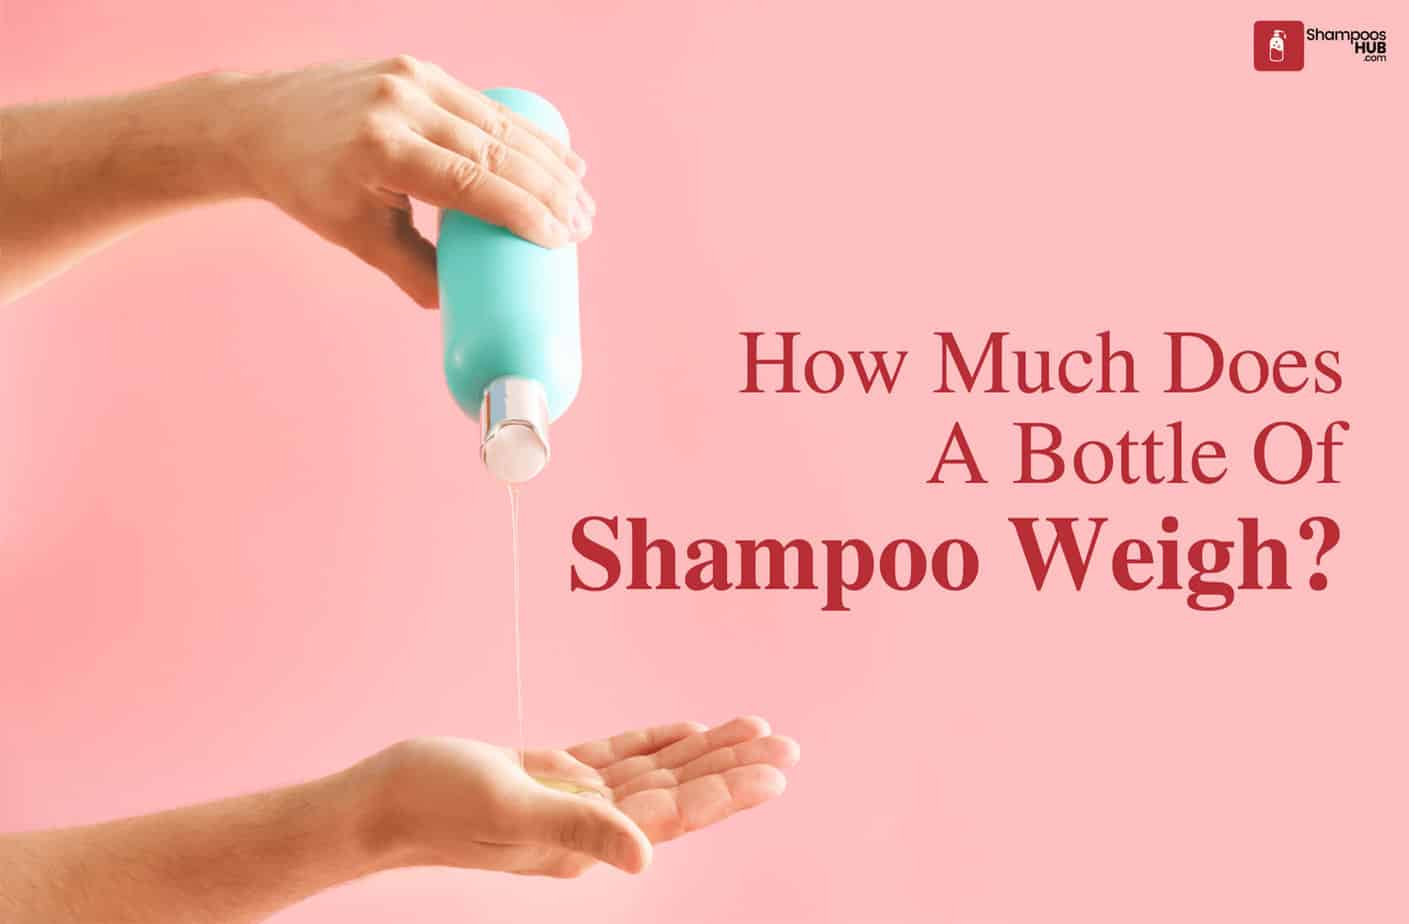 How Much Does A Bottle Of Shampoo Weigh?